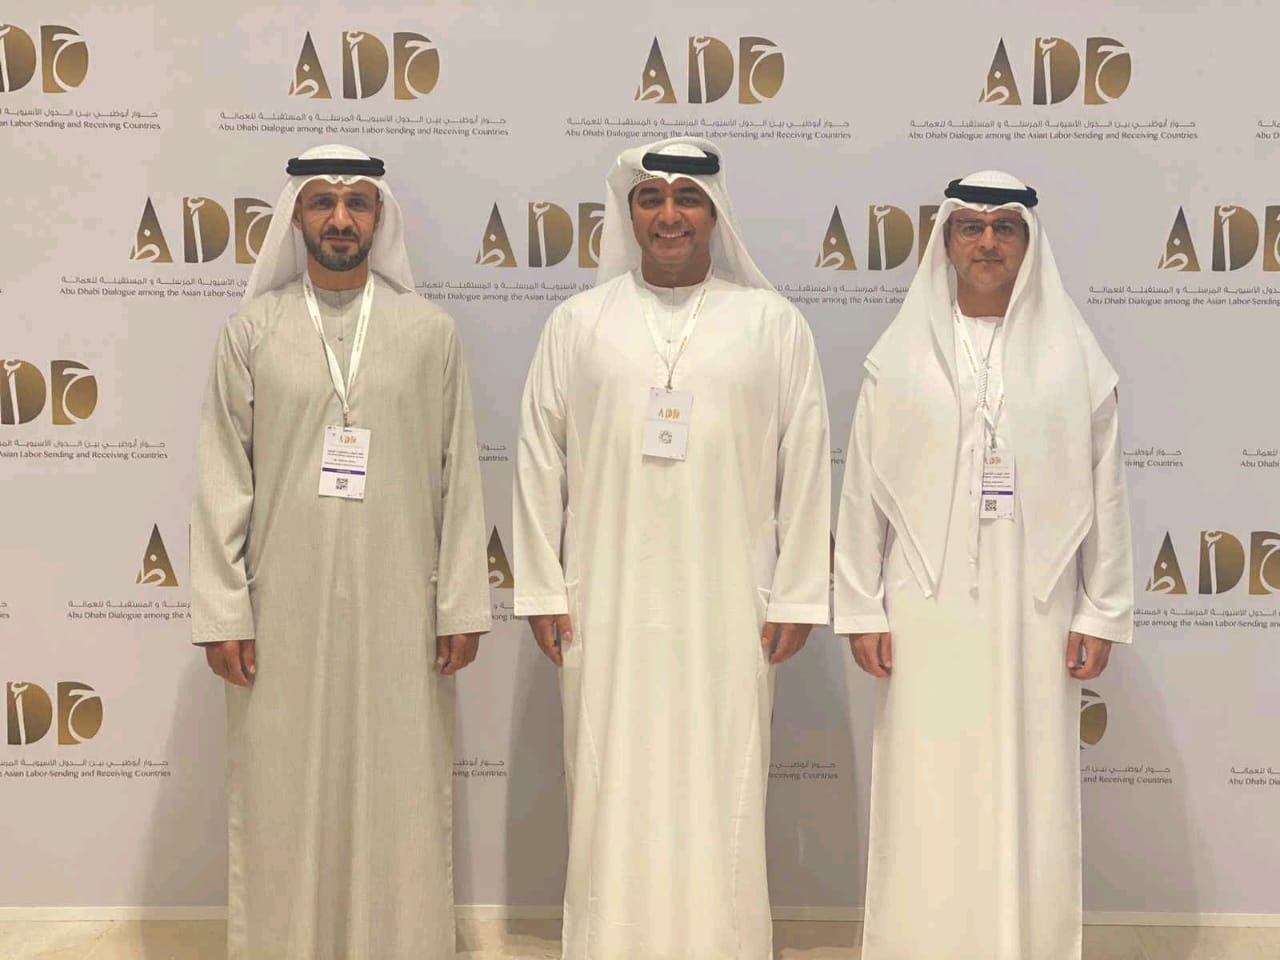 The NHRI participated as an "observer" in the Abu Dhabi Dialogue